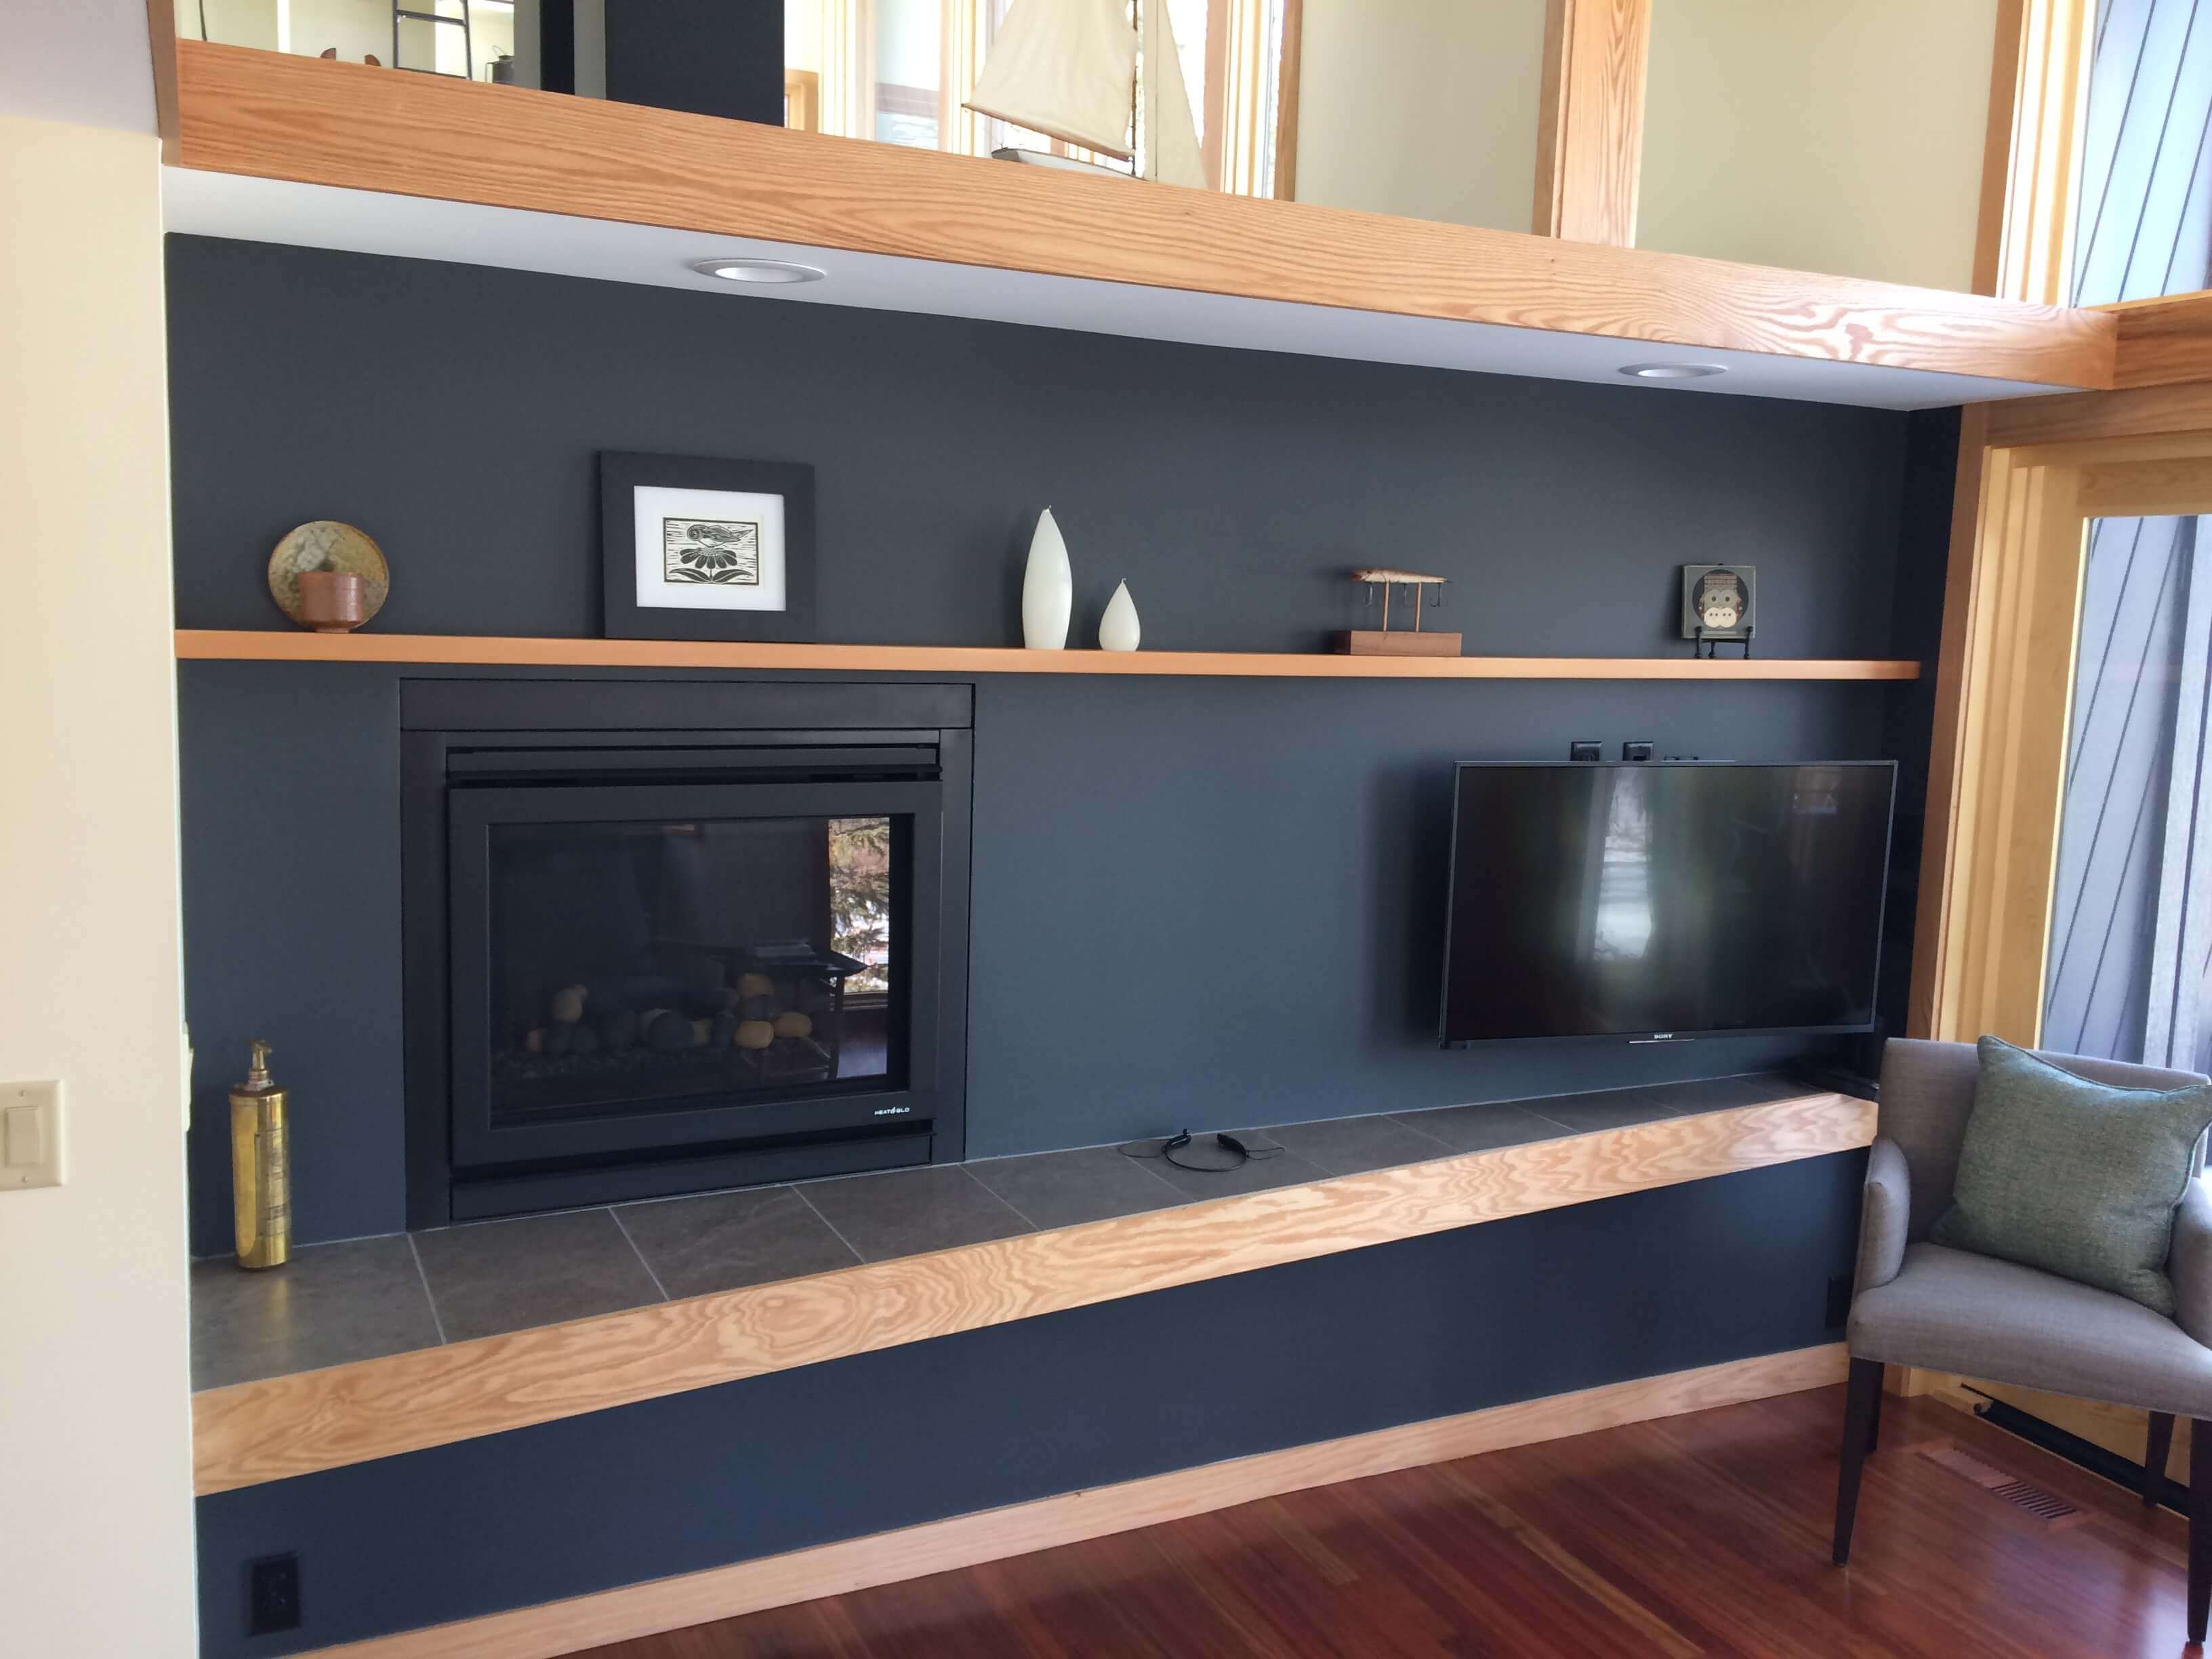 Custom Built-In Shelving, Entertainment Centers and Cabinet